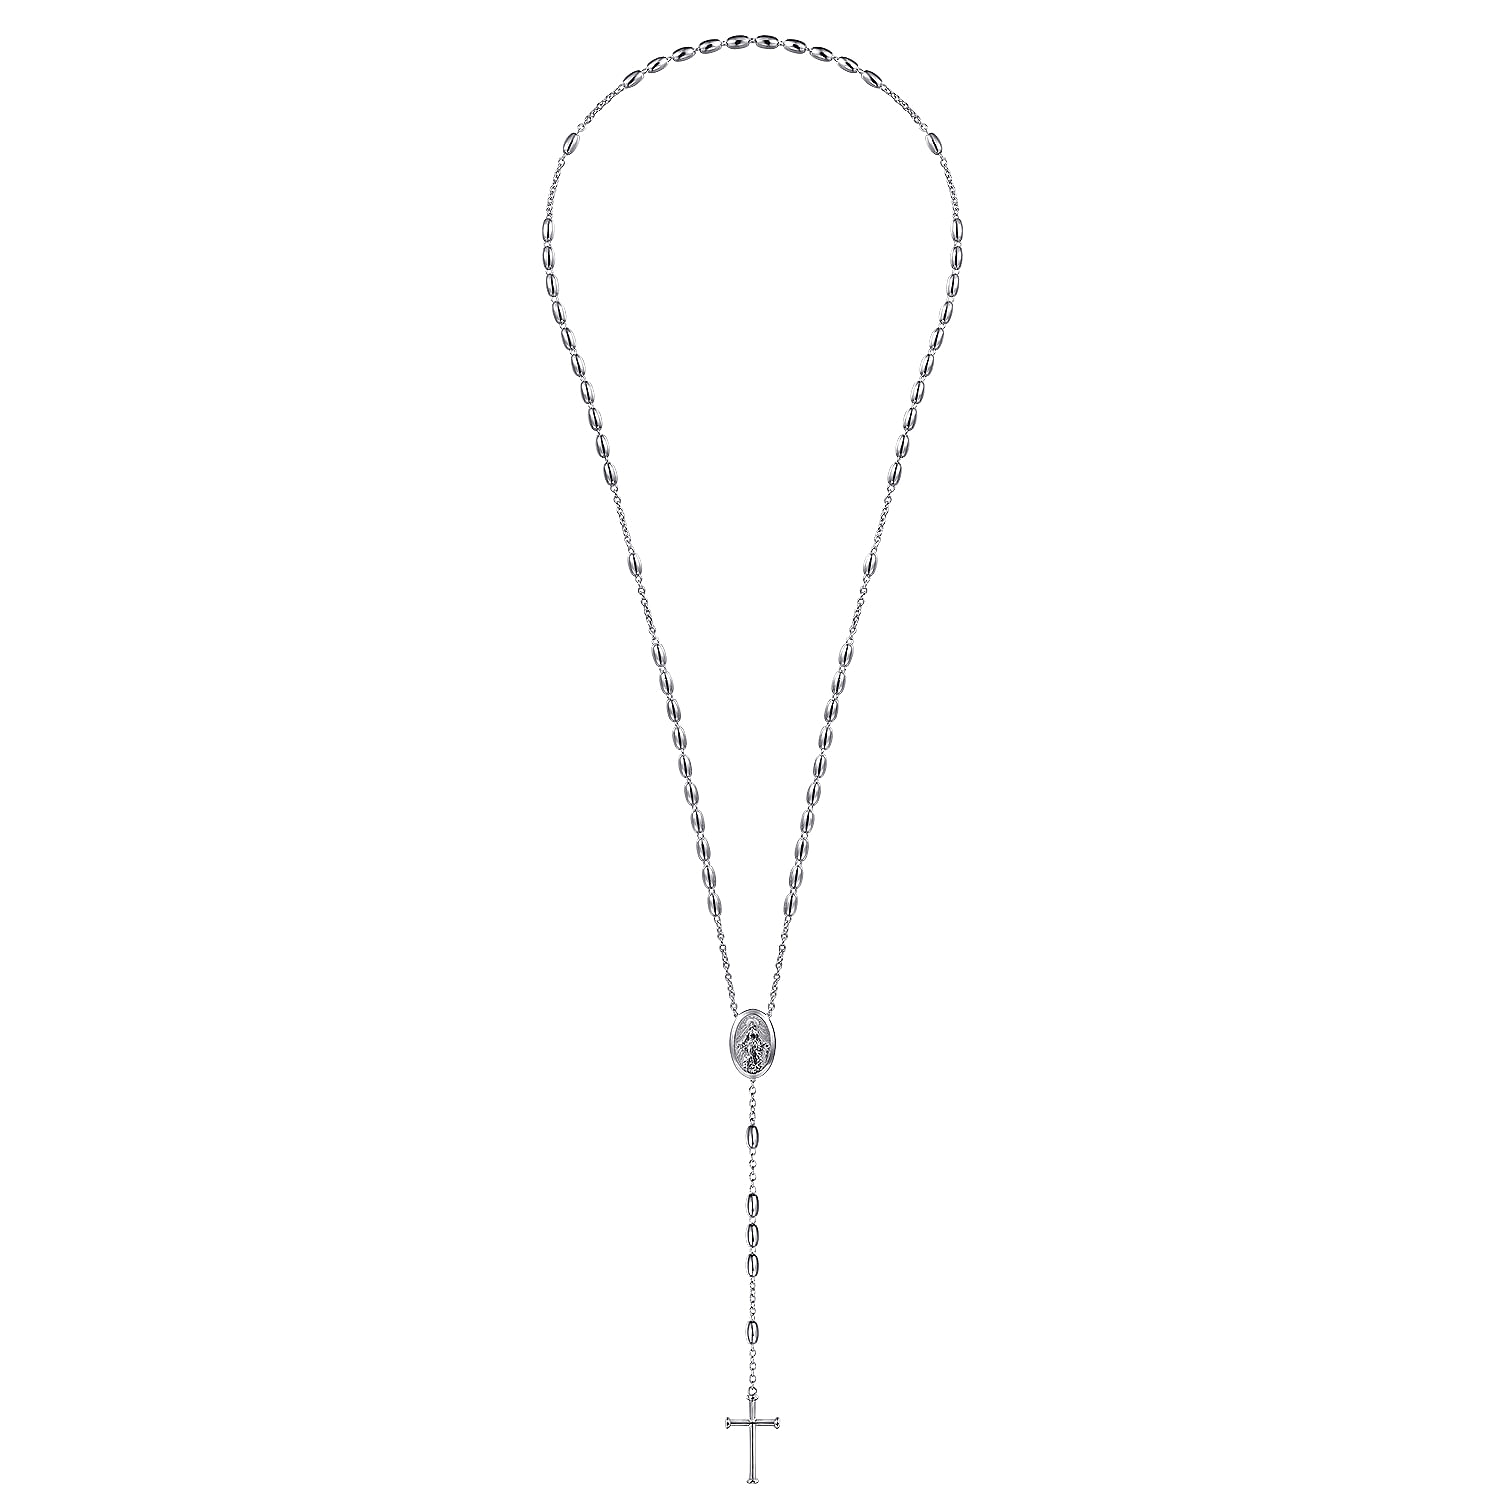 27 Inch 925 Sterling Silver Men's Cross Rosary Solid Men's Chain Necklace